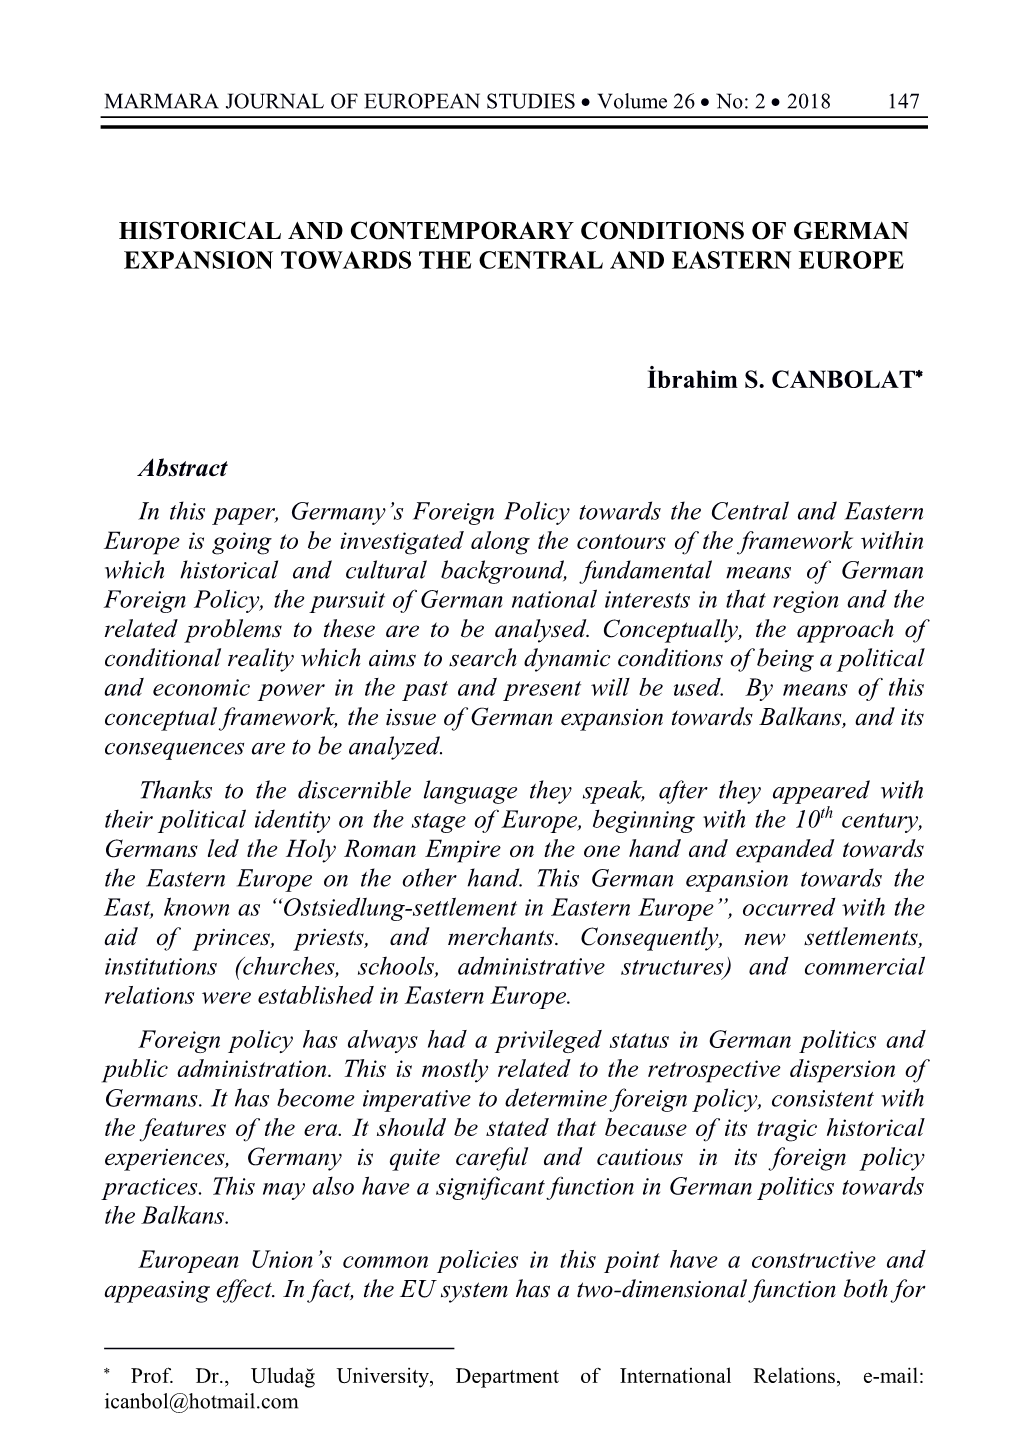 Historical and Contemporary Conditions of German Expansion Towards the Central and Eastern Europe